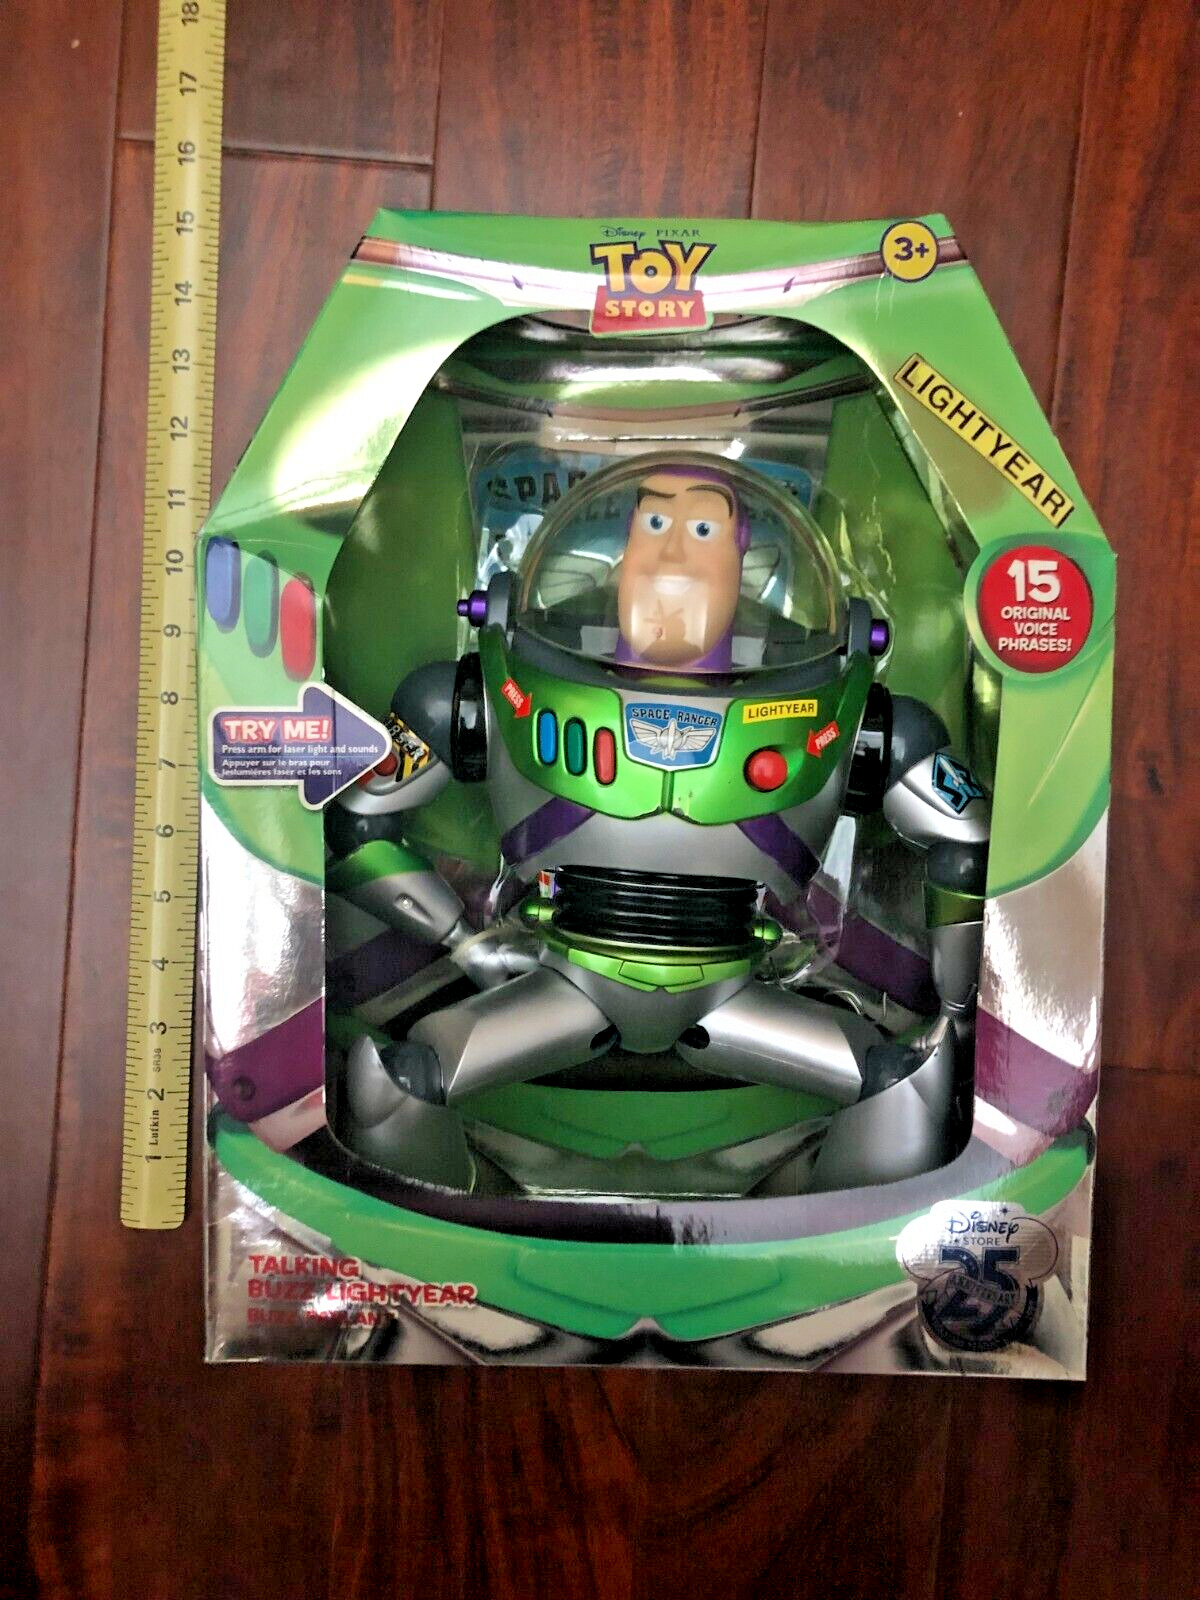 NEW vintage 1987 Toy Story Signature D23 25TH Anniversary Talking Buzz Lightyear